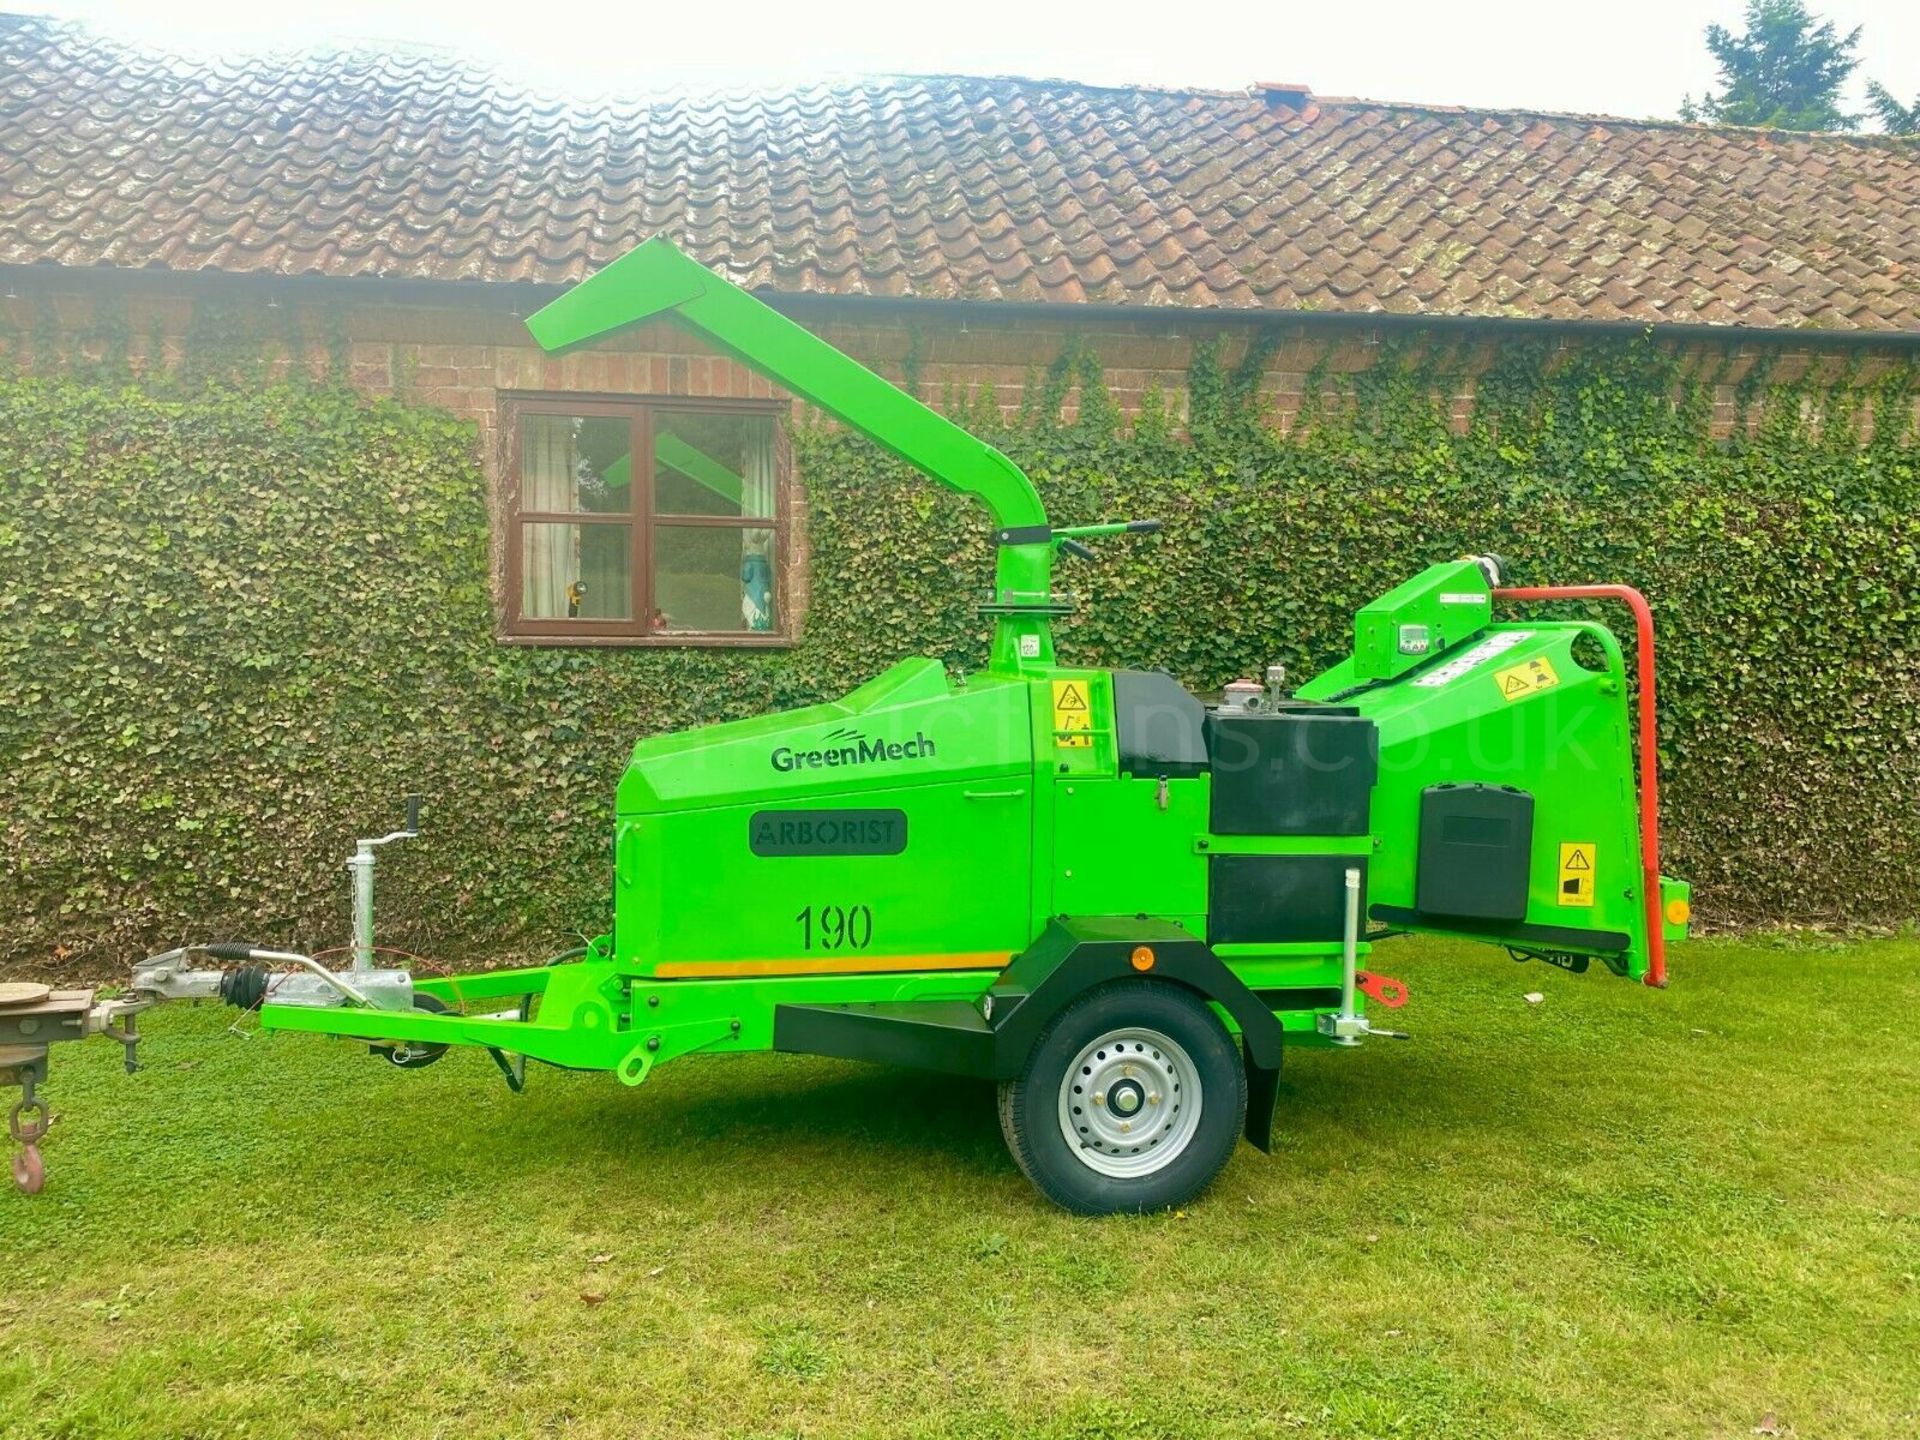 GREENMECH WOODCHIPPER, YEAR 2015, 190MM CHIPPING CAPACITY, ARBORIST 190, ONLY 275 HOURS *PLUS VAT* - Image 3 of 8